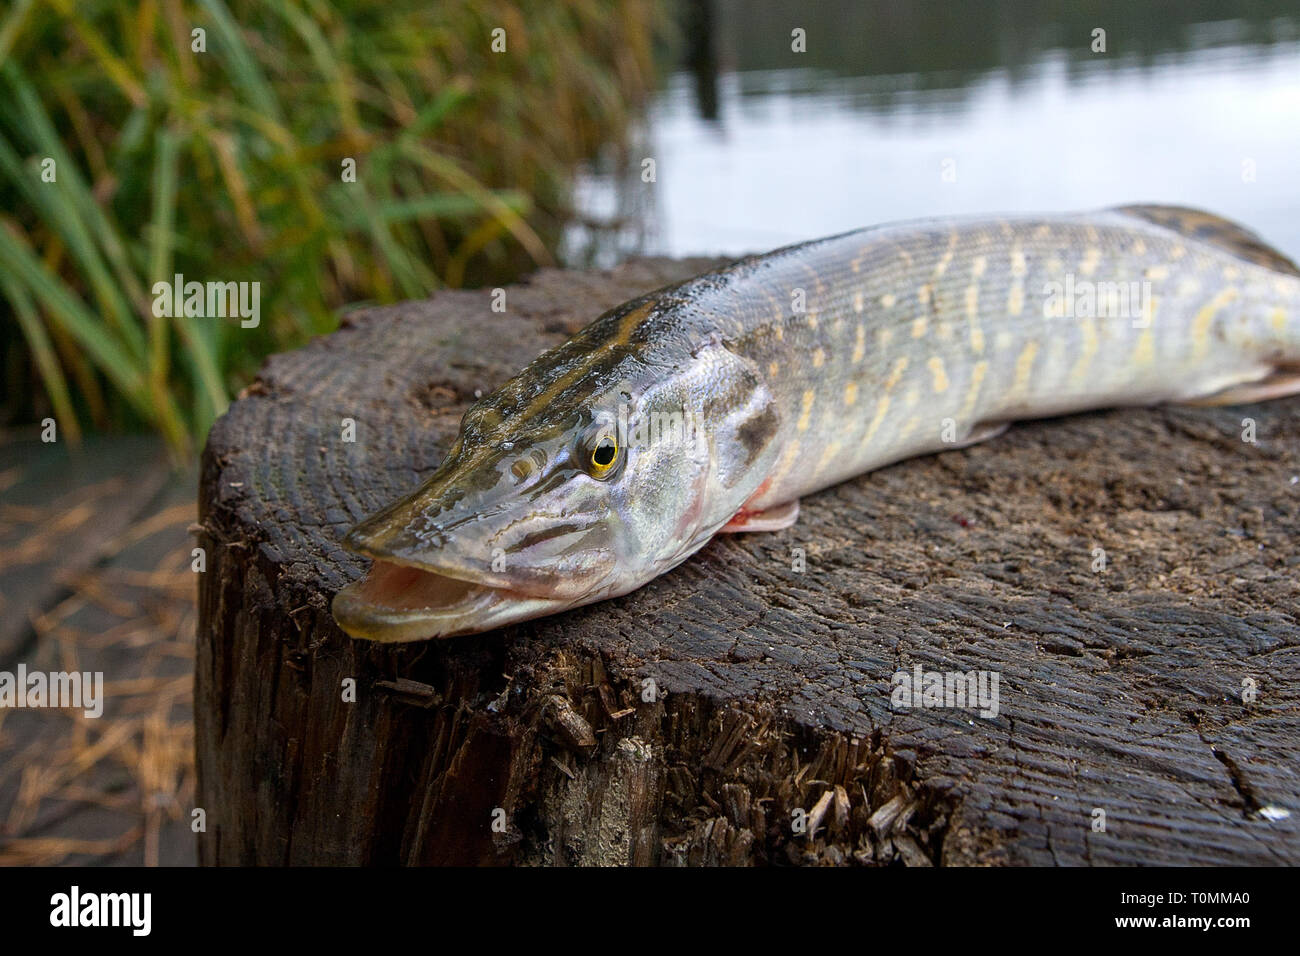 Freshwater Northern pike fish know as Esox Lucius lying on a wooden hemp.  Fishing concept, good catch - big freshwater pike fish just taken from the  w Stock Photo - Alamy